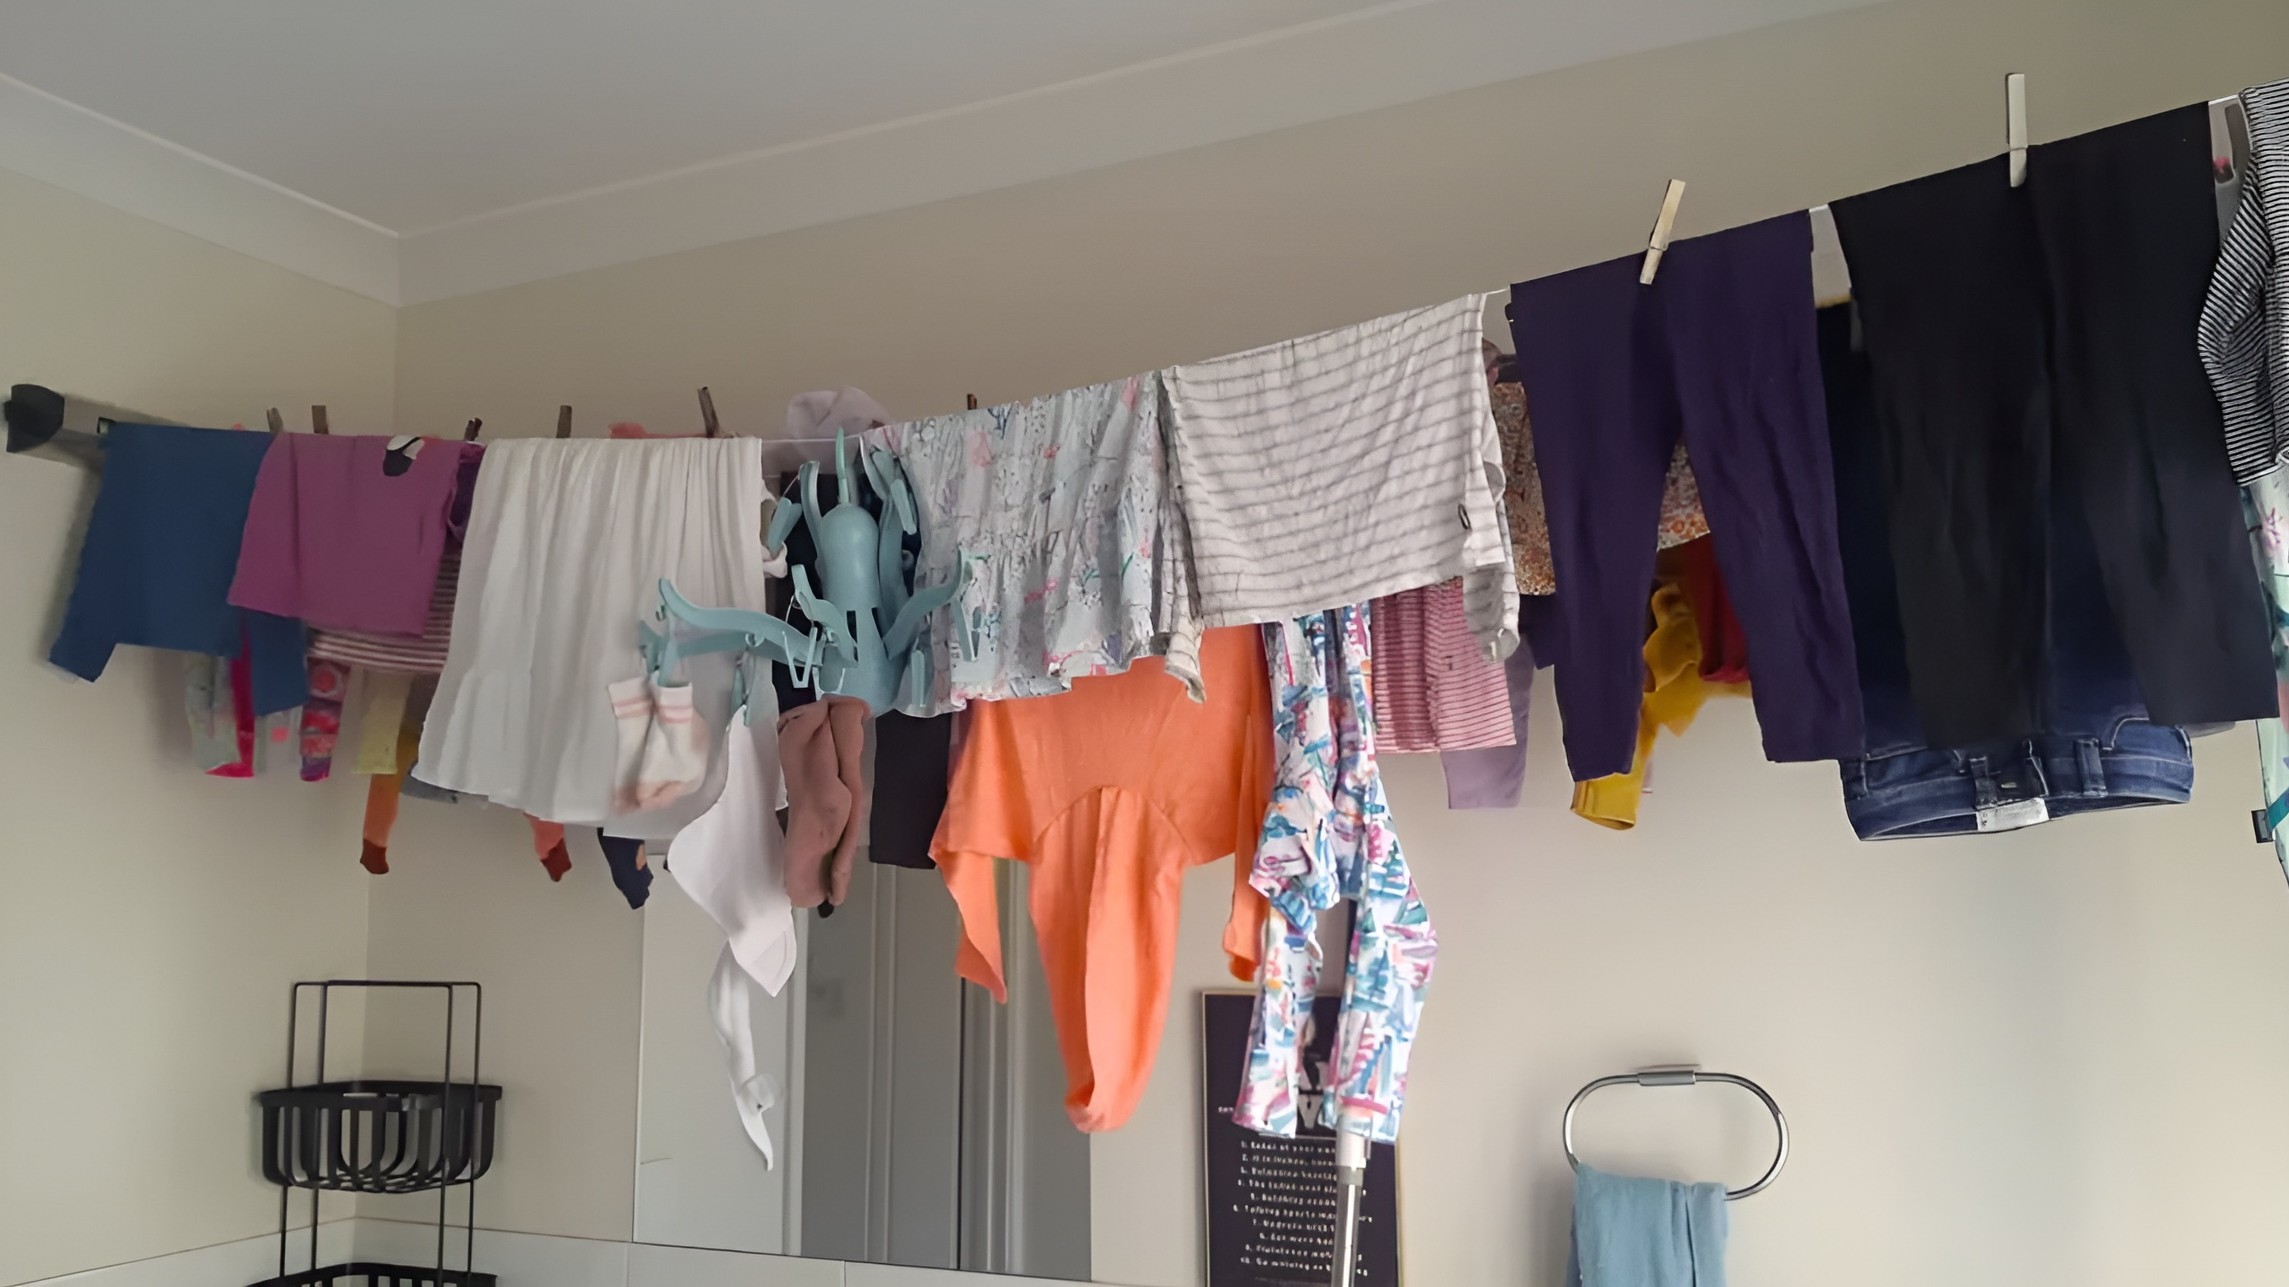 Heavy Duty Wall Mounted Washing Line Narrow Niche: Solutions for Narrow Areas